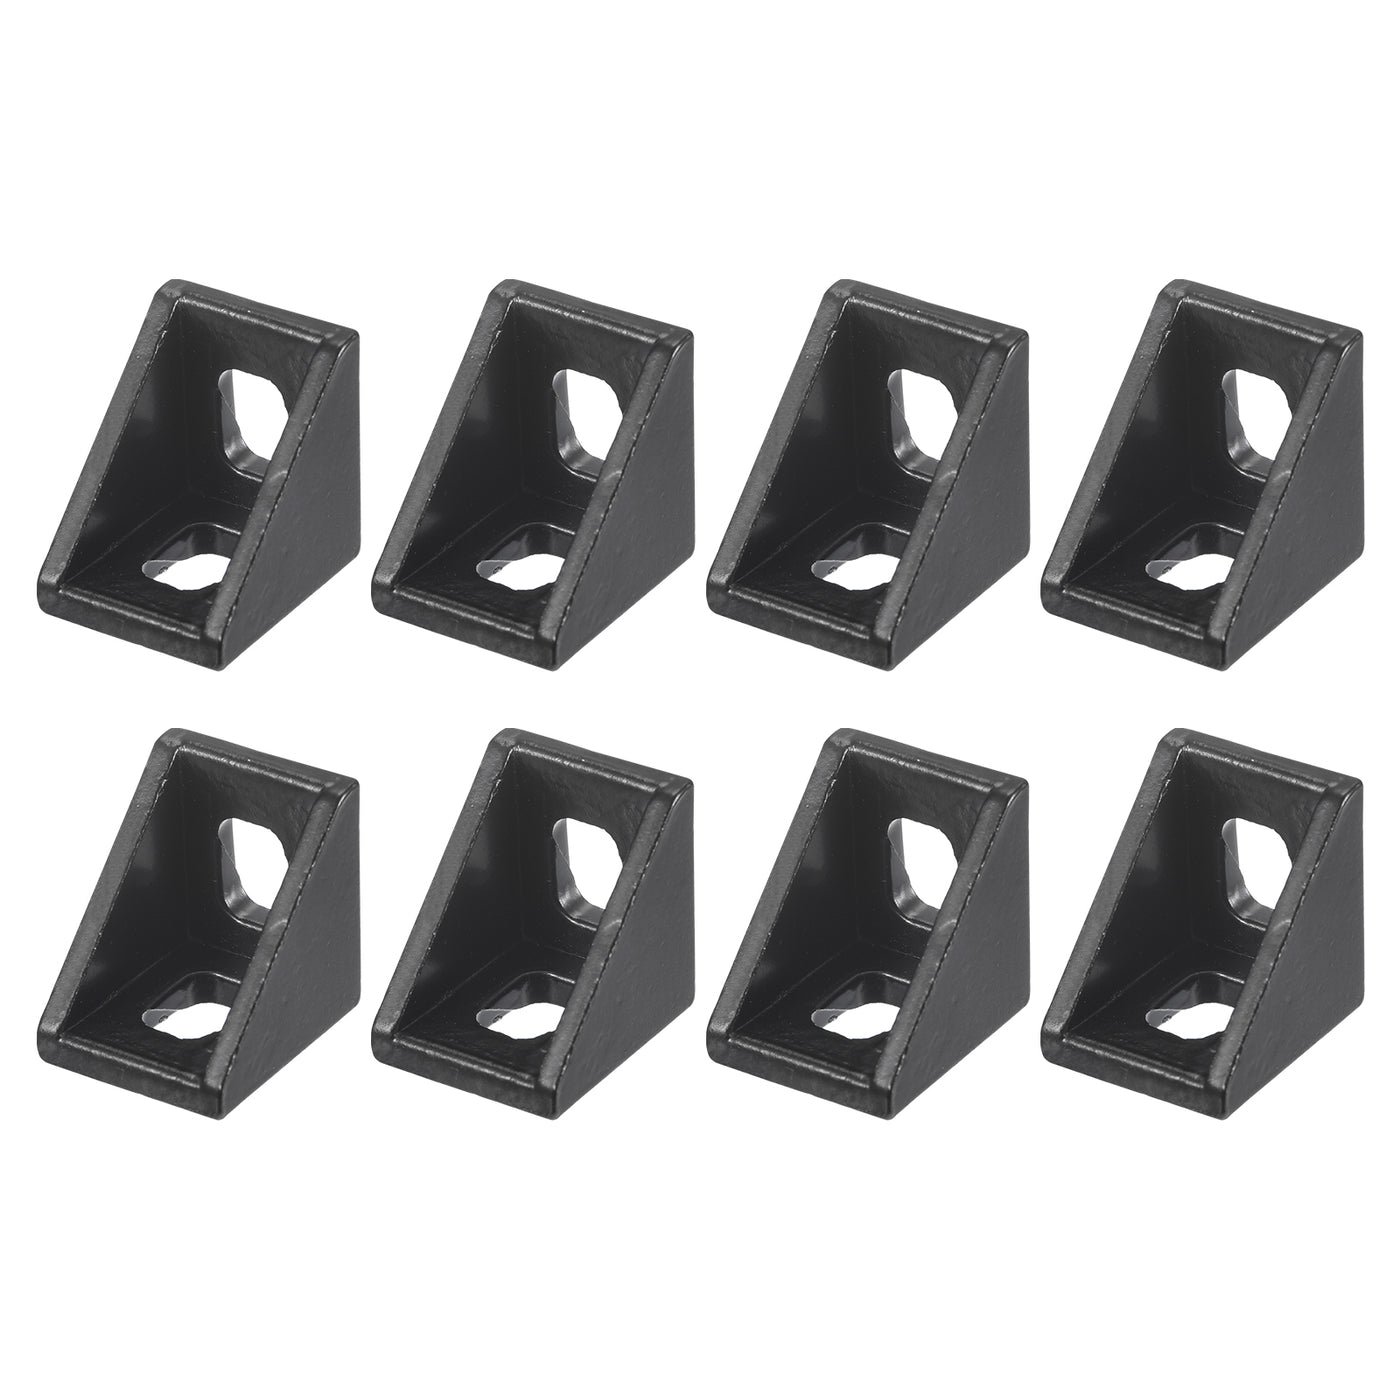 uxcell Uxcell 8Pcs Inside Corner Bracket Gusset, 20x20x17mm 2020 Angle Connectors for 2020 Series Aluminum Extrusion Profile Black